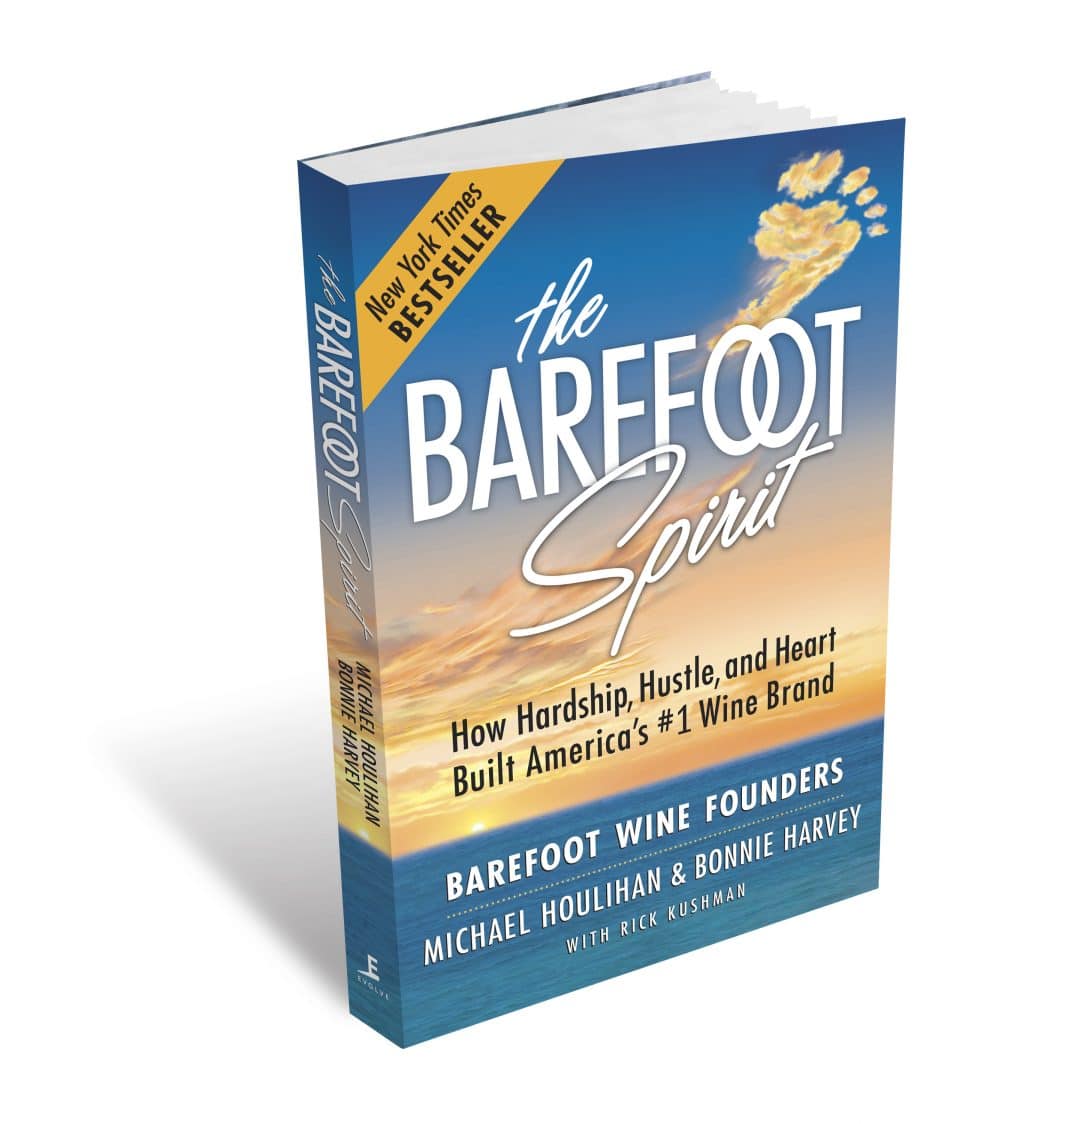 BarefootSpirit_3D Image with Shadow